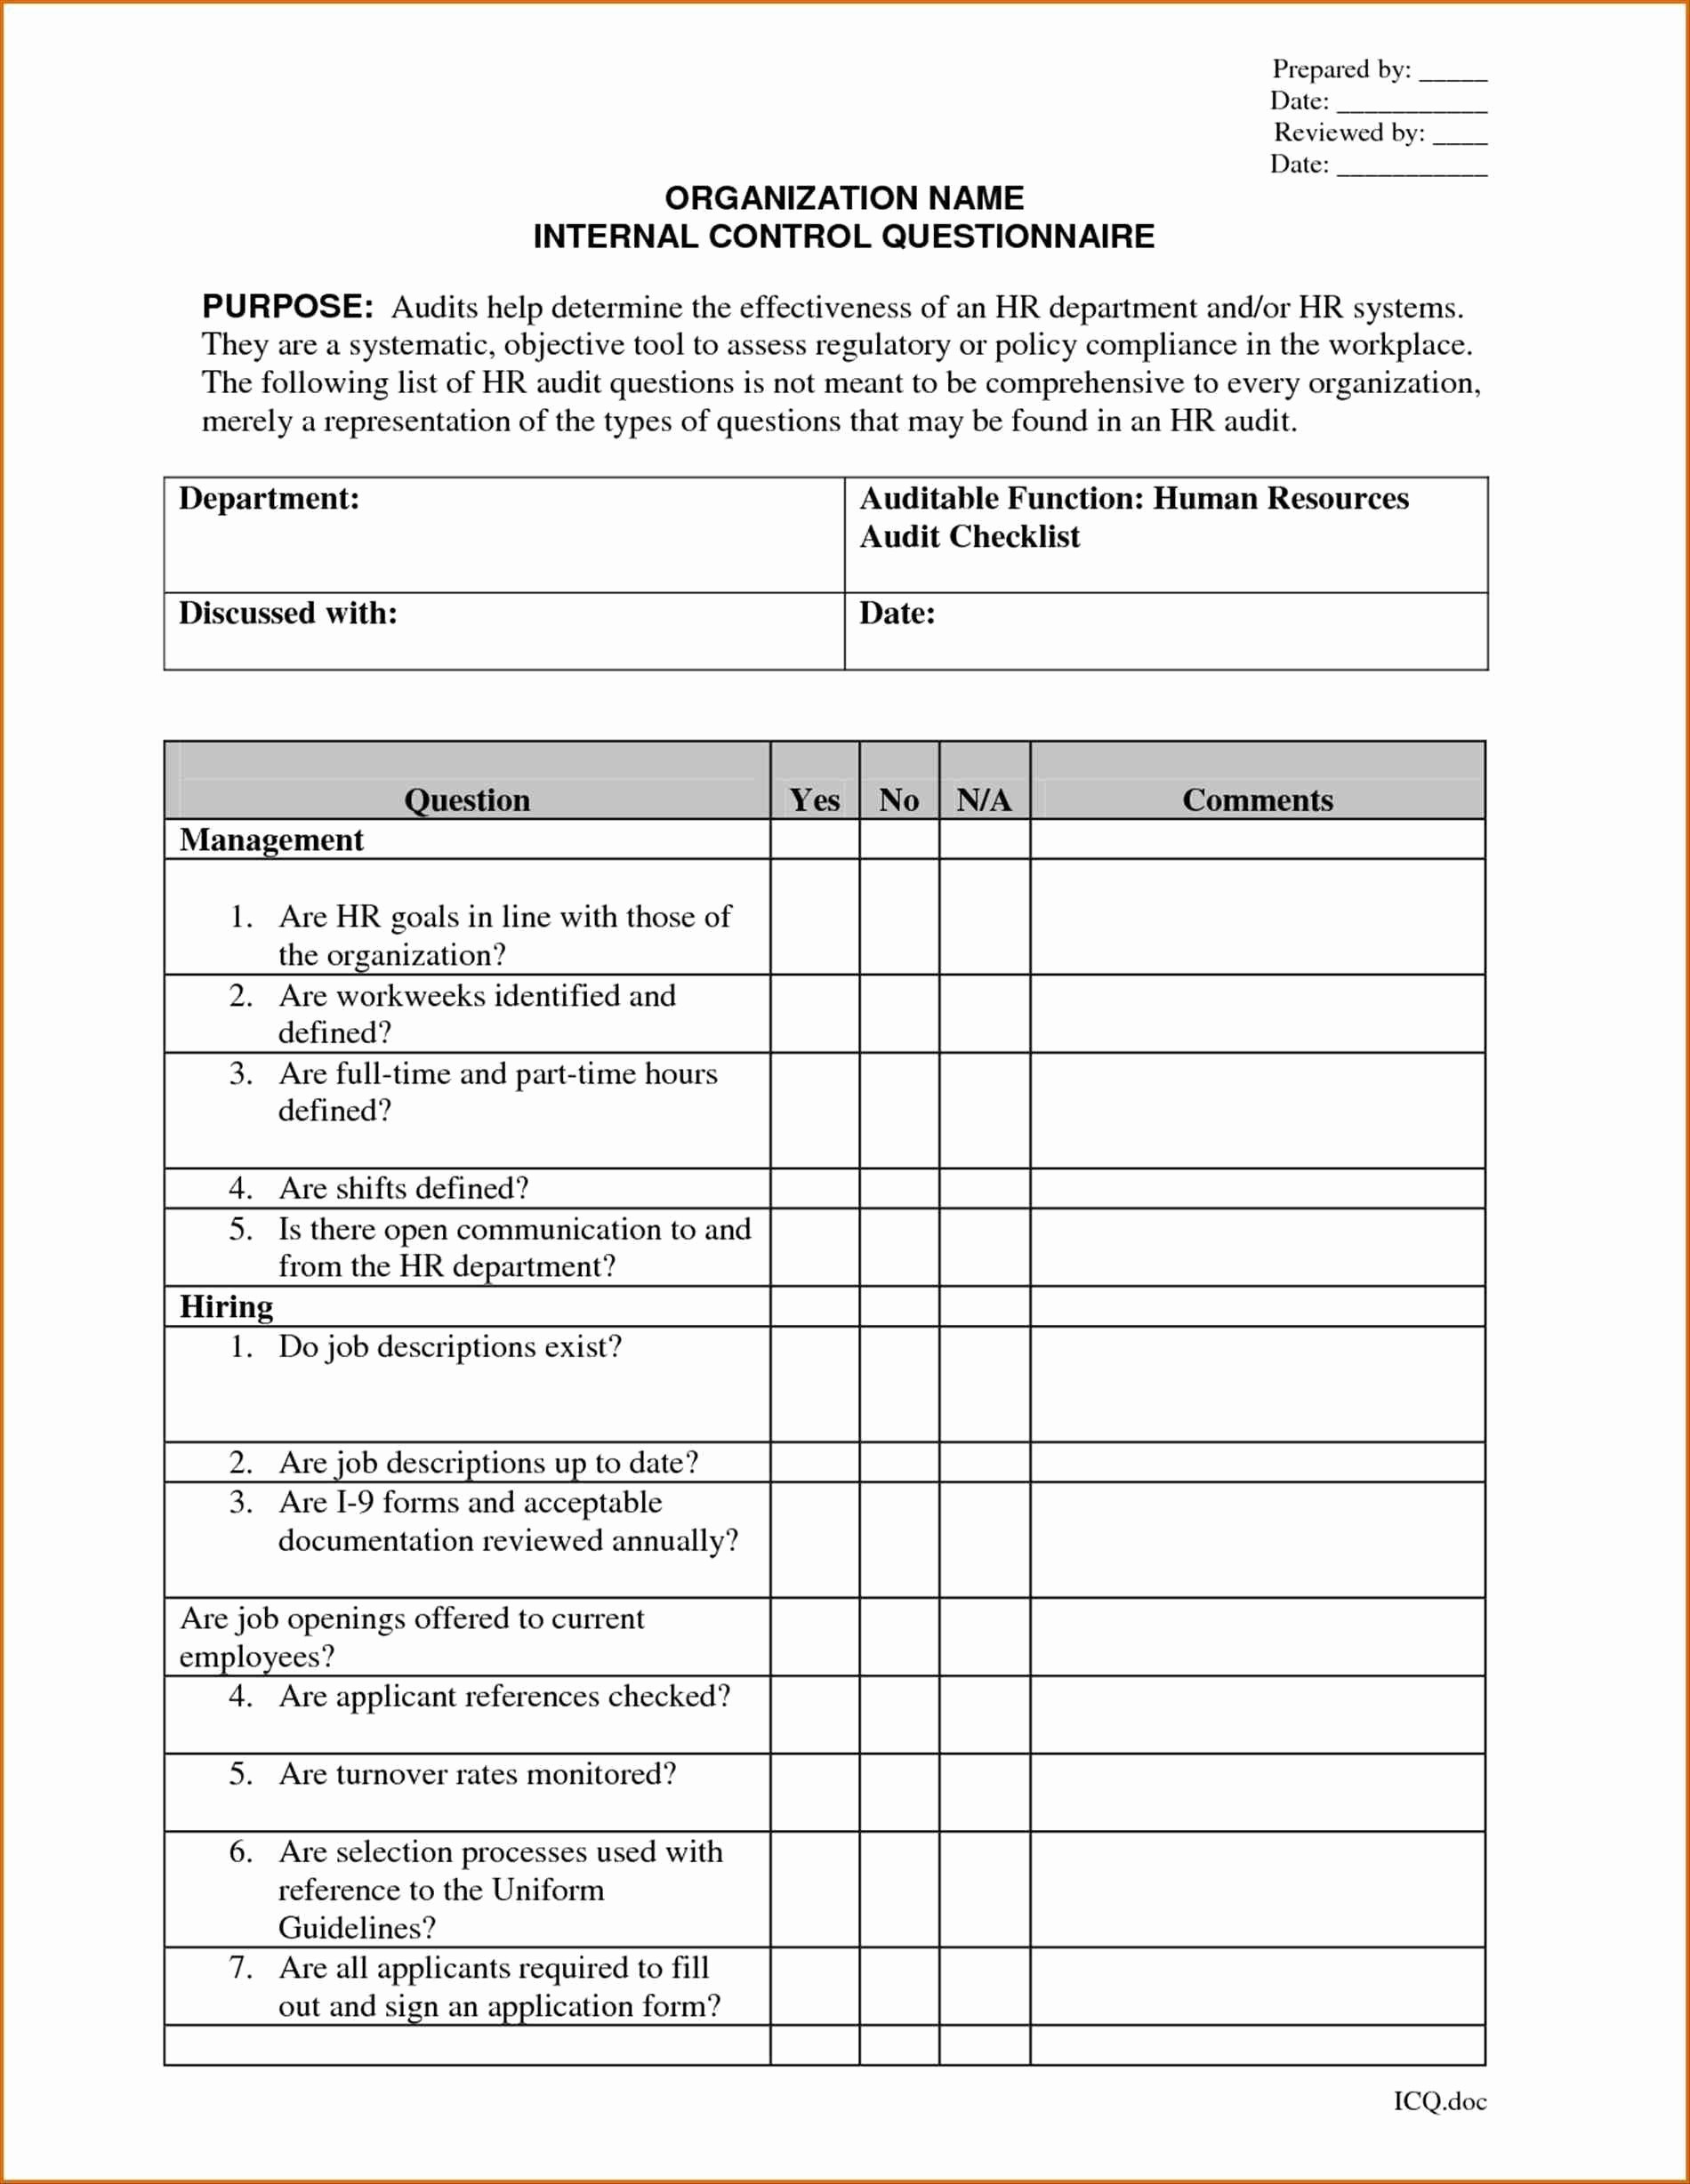 Excel Data Entry Form Template 2010 Awesome Microsoft Excel to Inventory Control Form Template